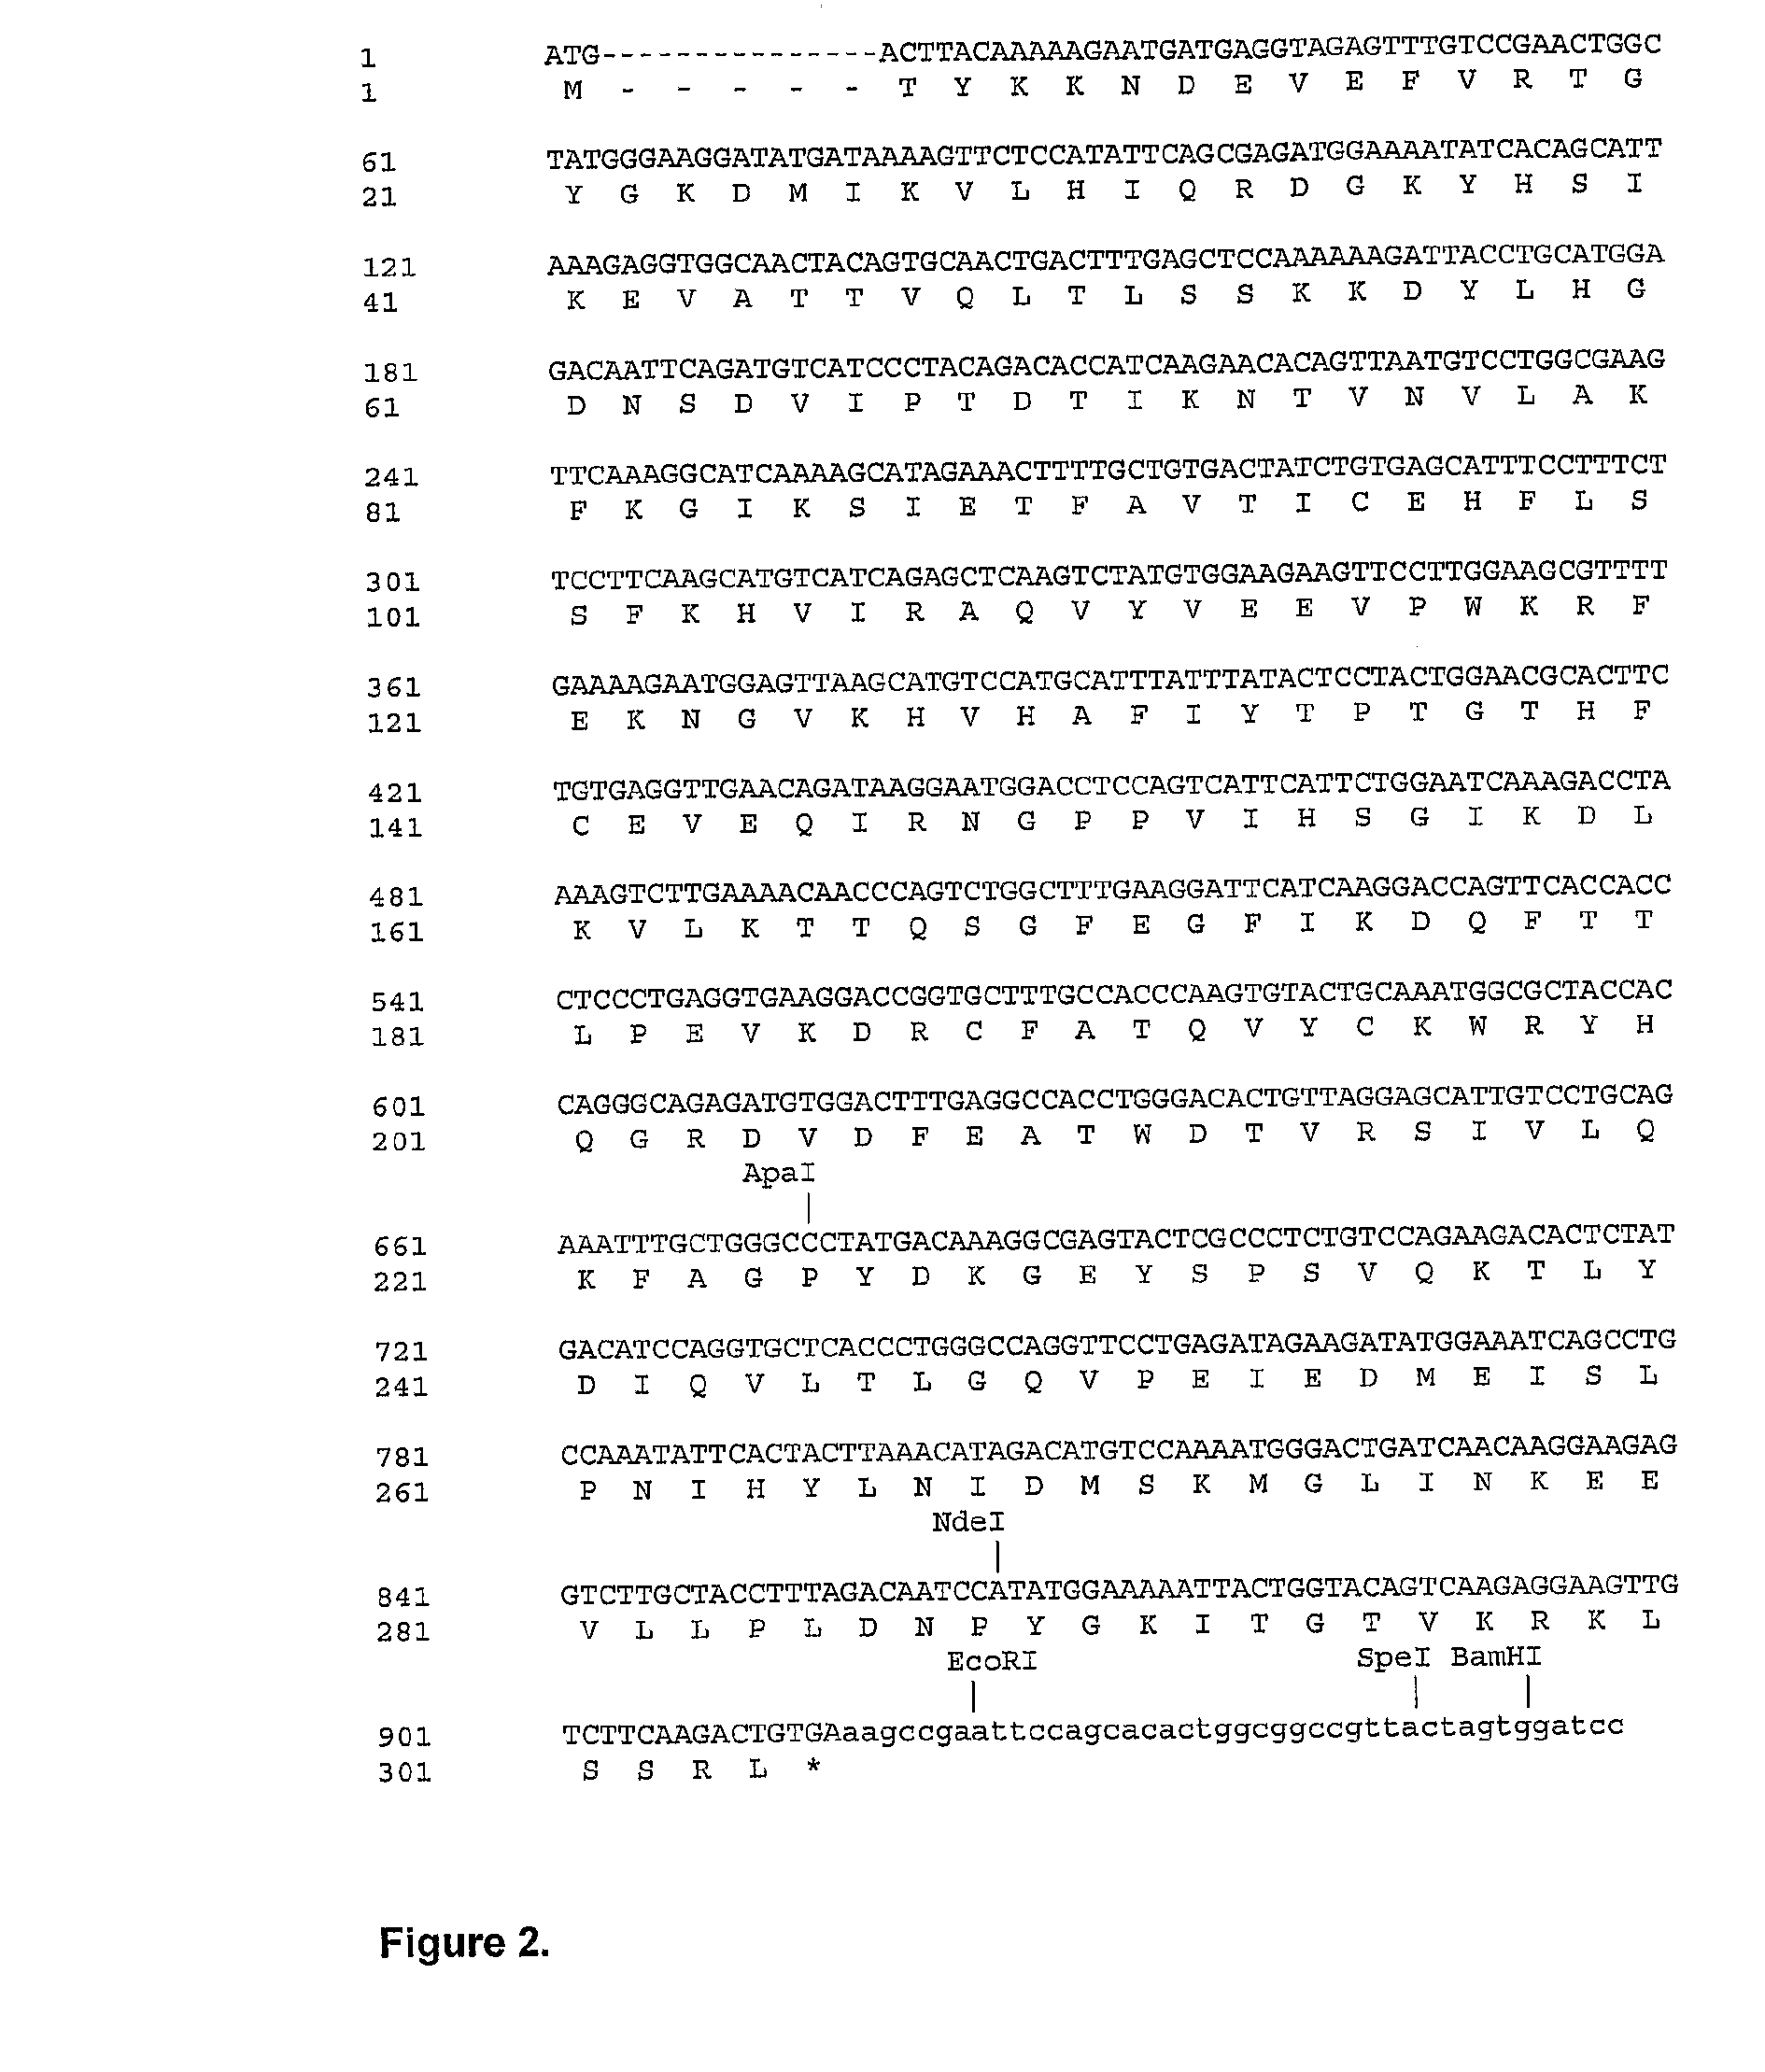 Variant form of urate oxidase and use thereof